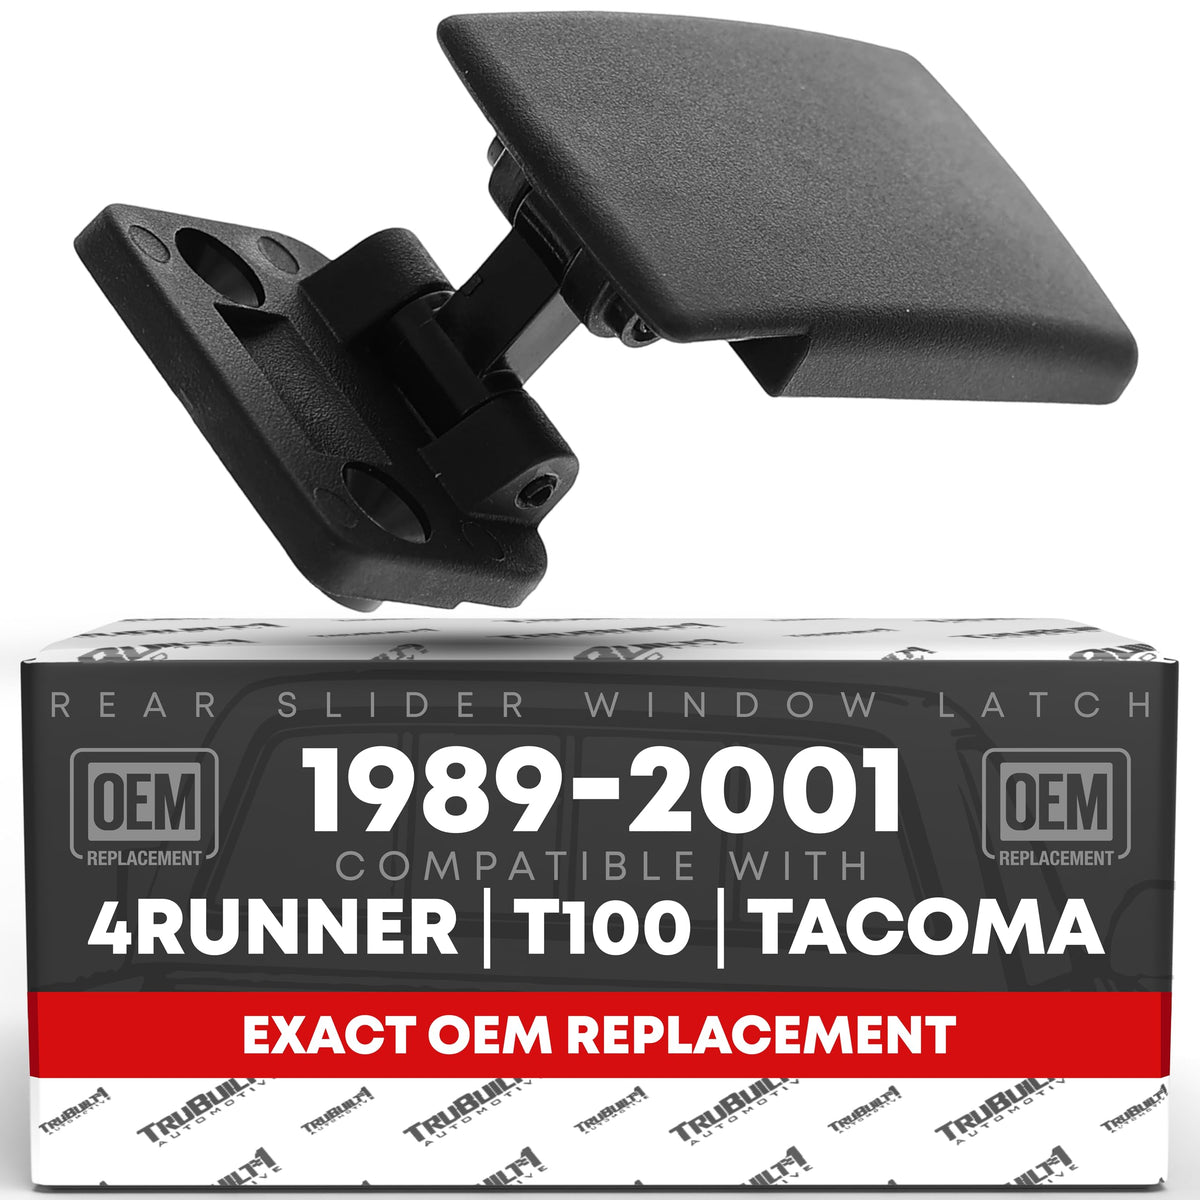 Rear Sliding Window Latch - Compatible with 1993-2000 Toyota 4Runner, T100, Tacoma - Rear Slider Quarter Window Latch in Black, Plastic - OEM 69370-35010, 69370-89103